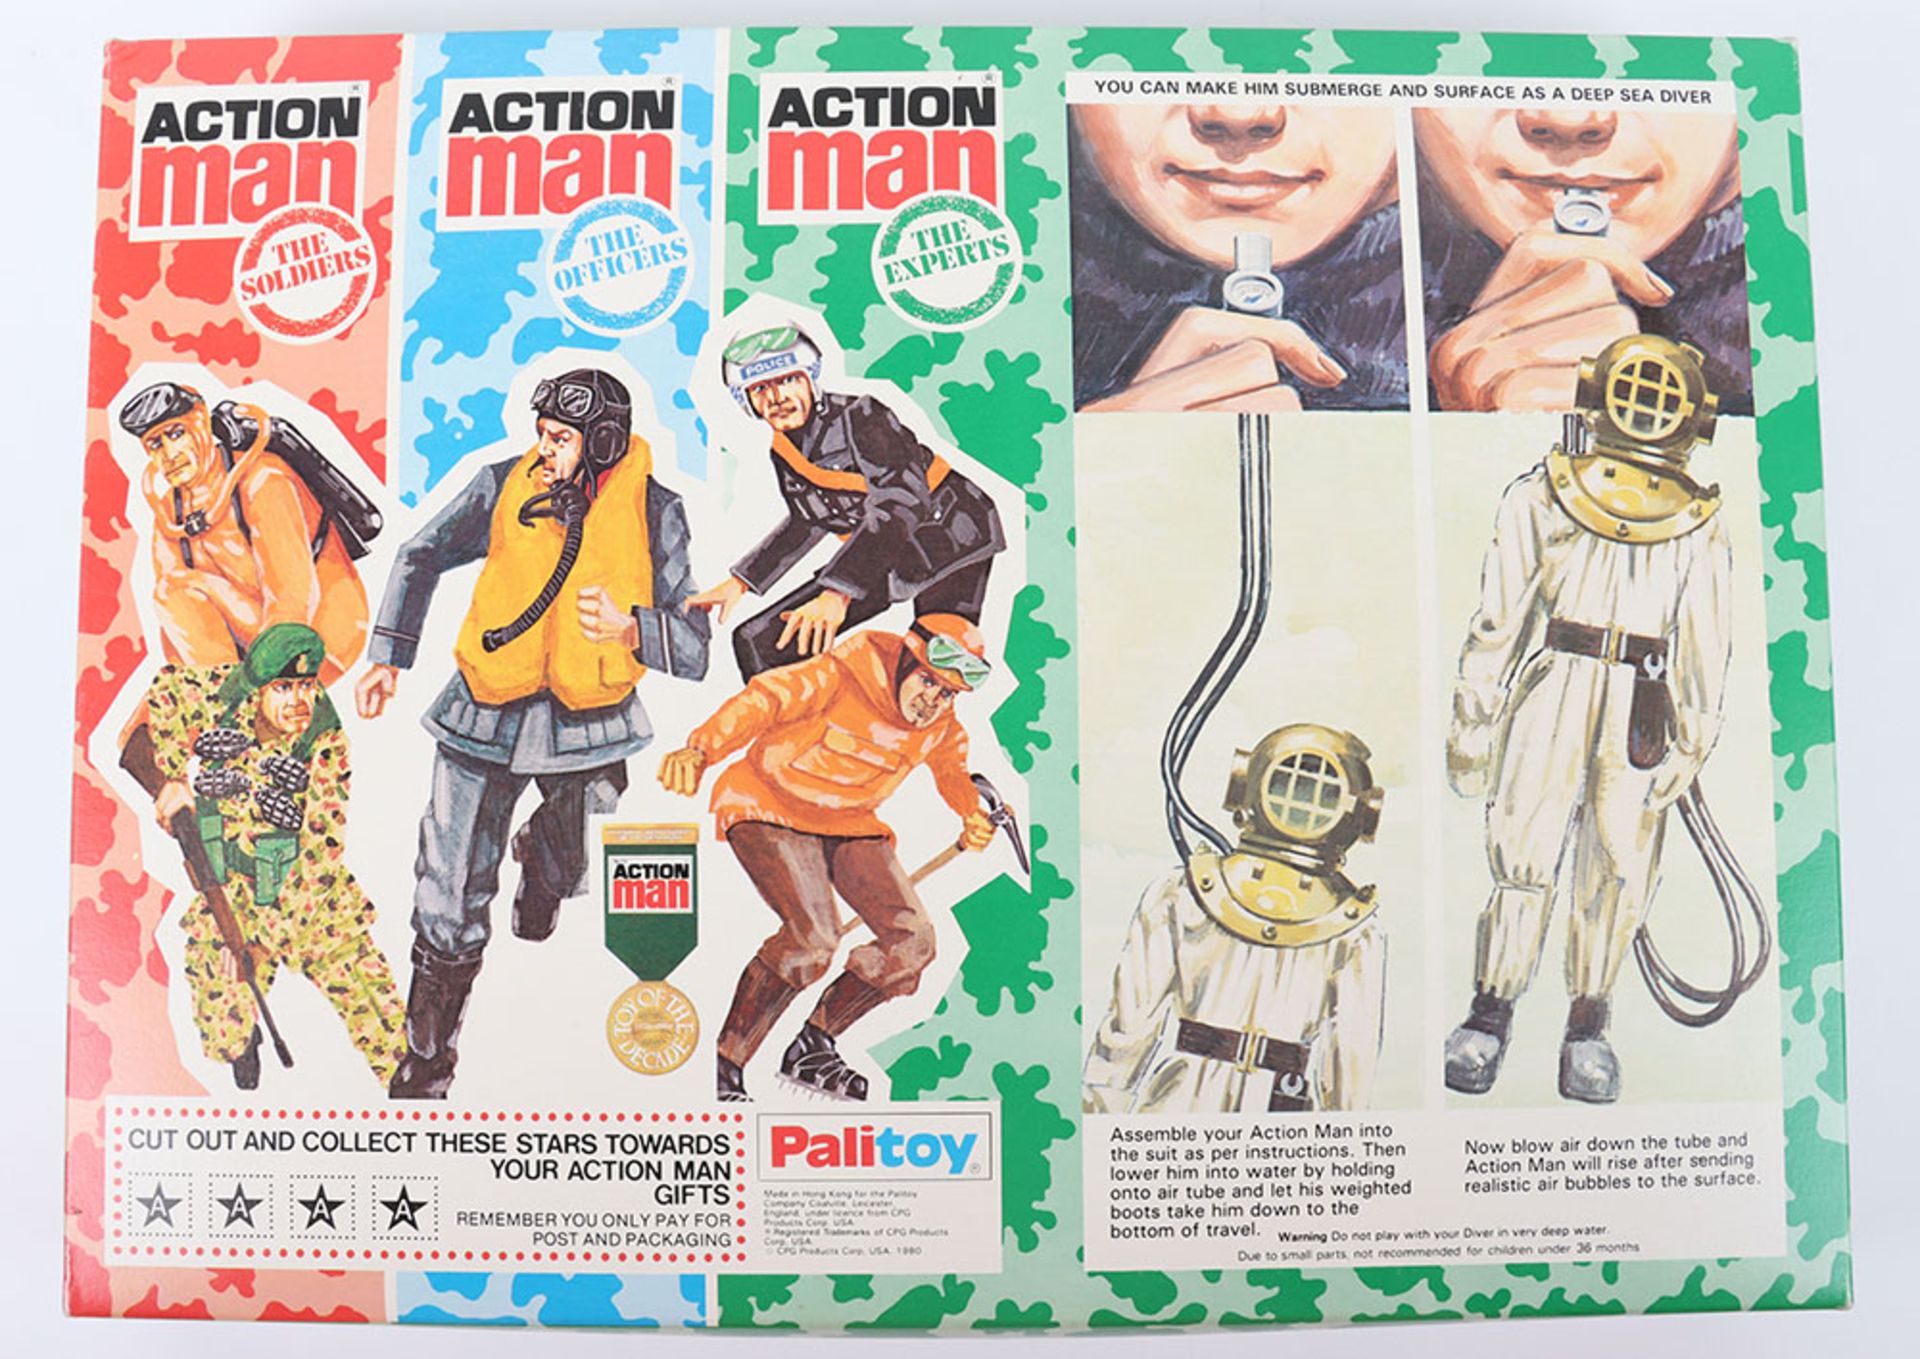 Action Man The Experts Deep Sea Diver Outfit, circa 1979 - Image 2 of 4